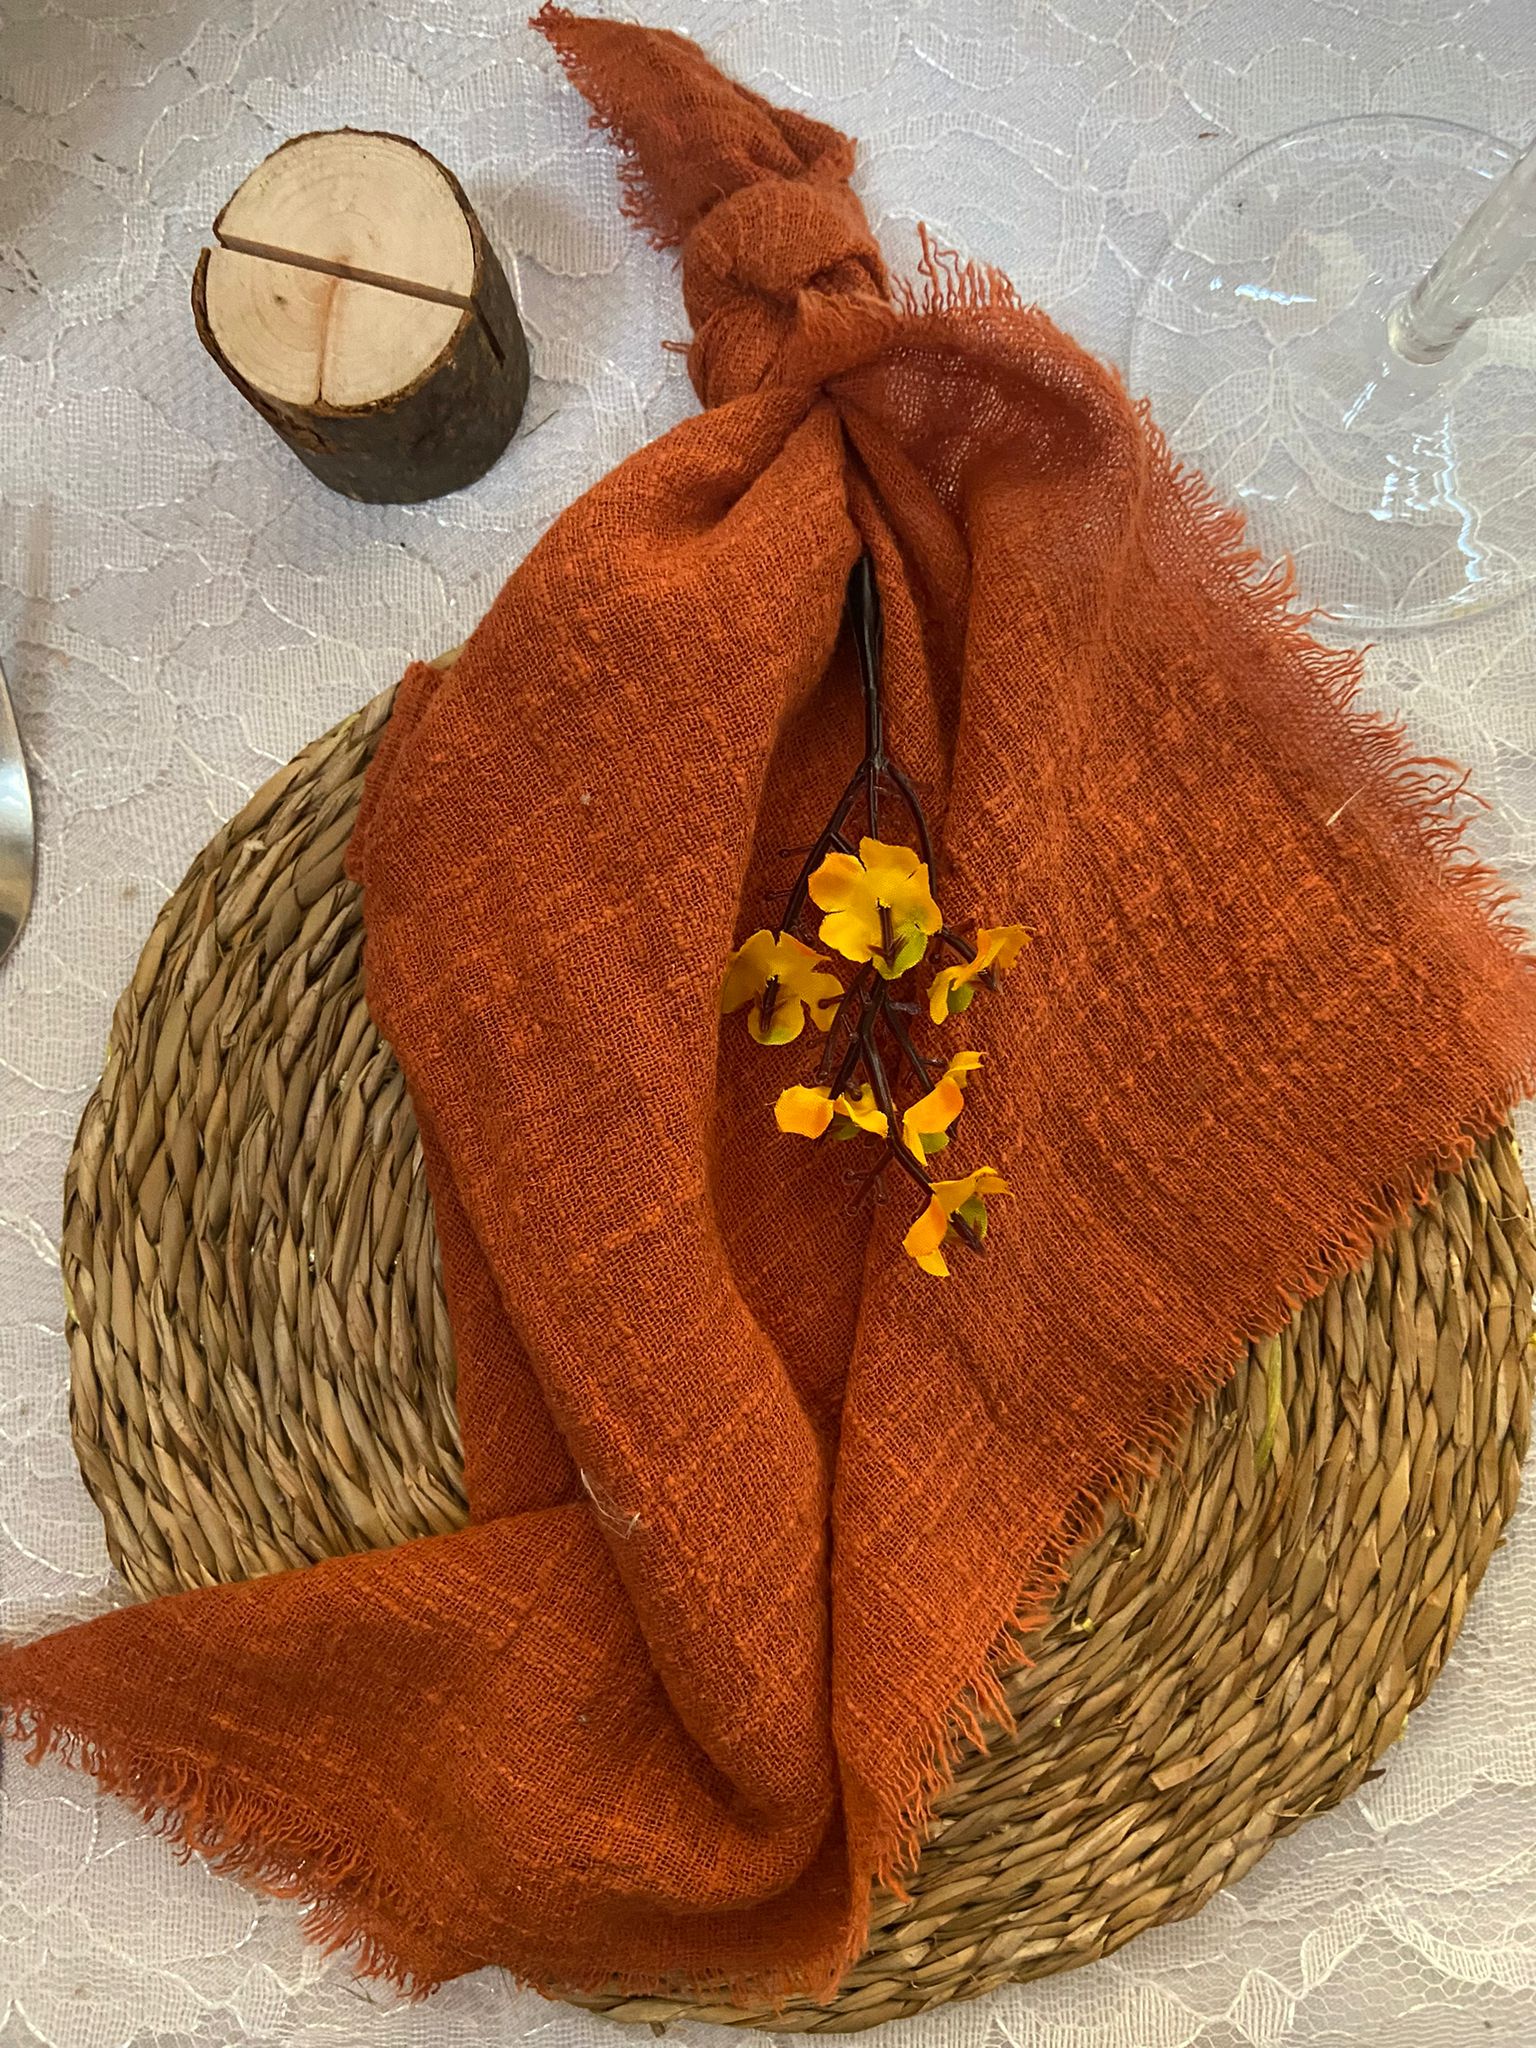 Harvest Moon place setting with wicker charger place and rust orange napkin